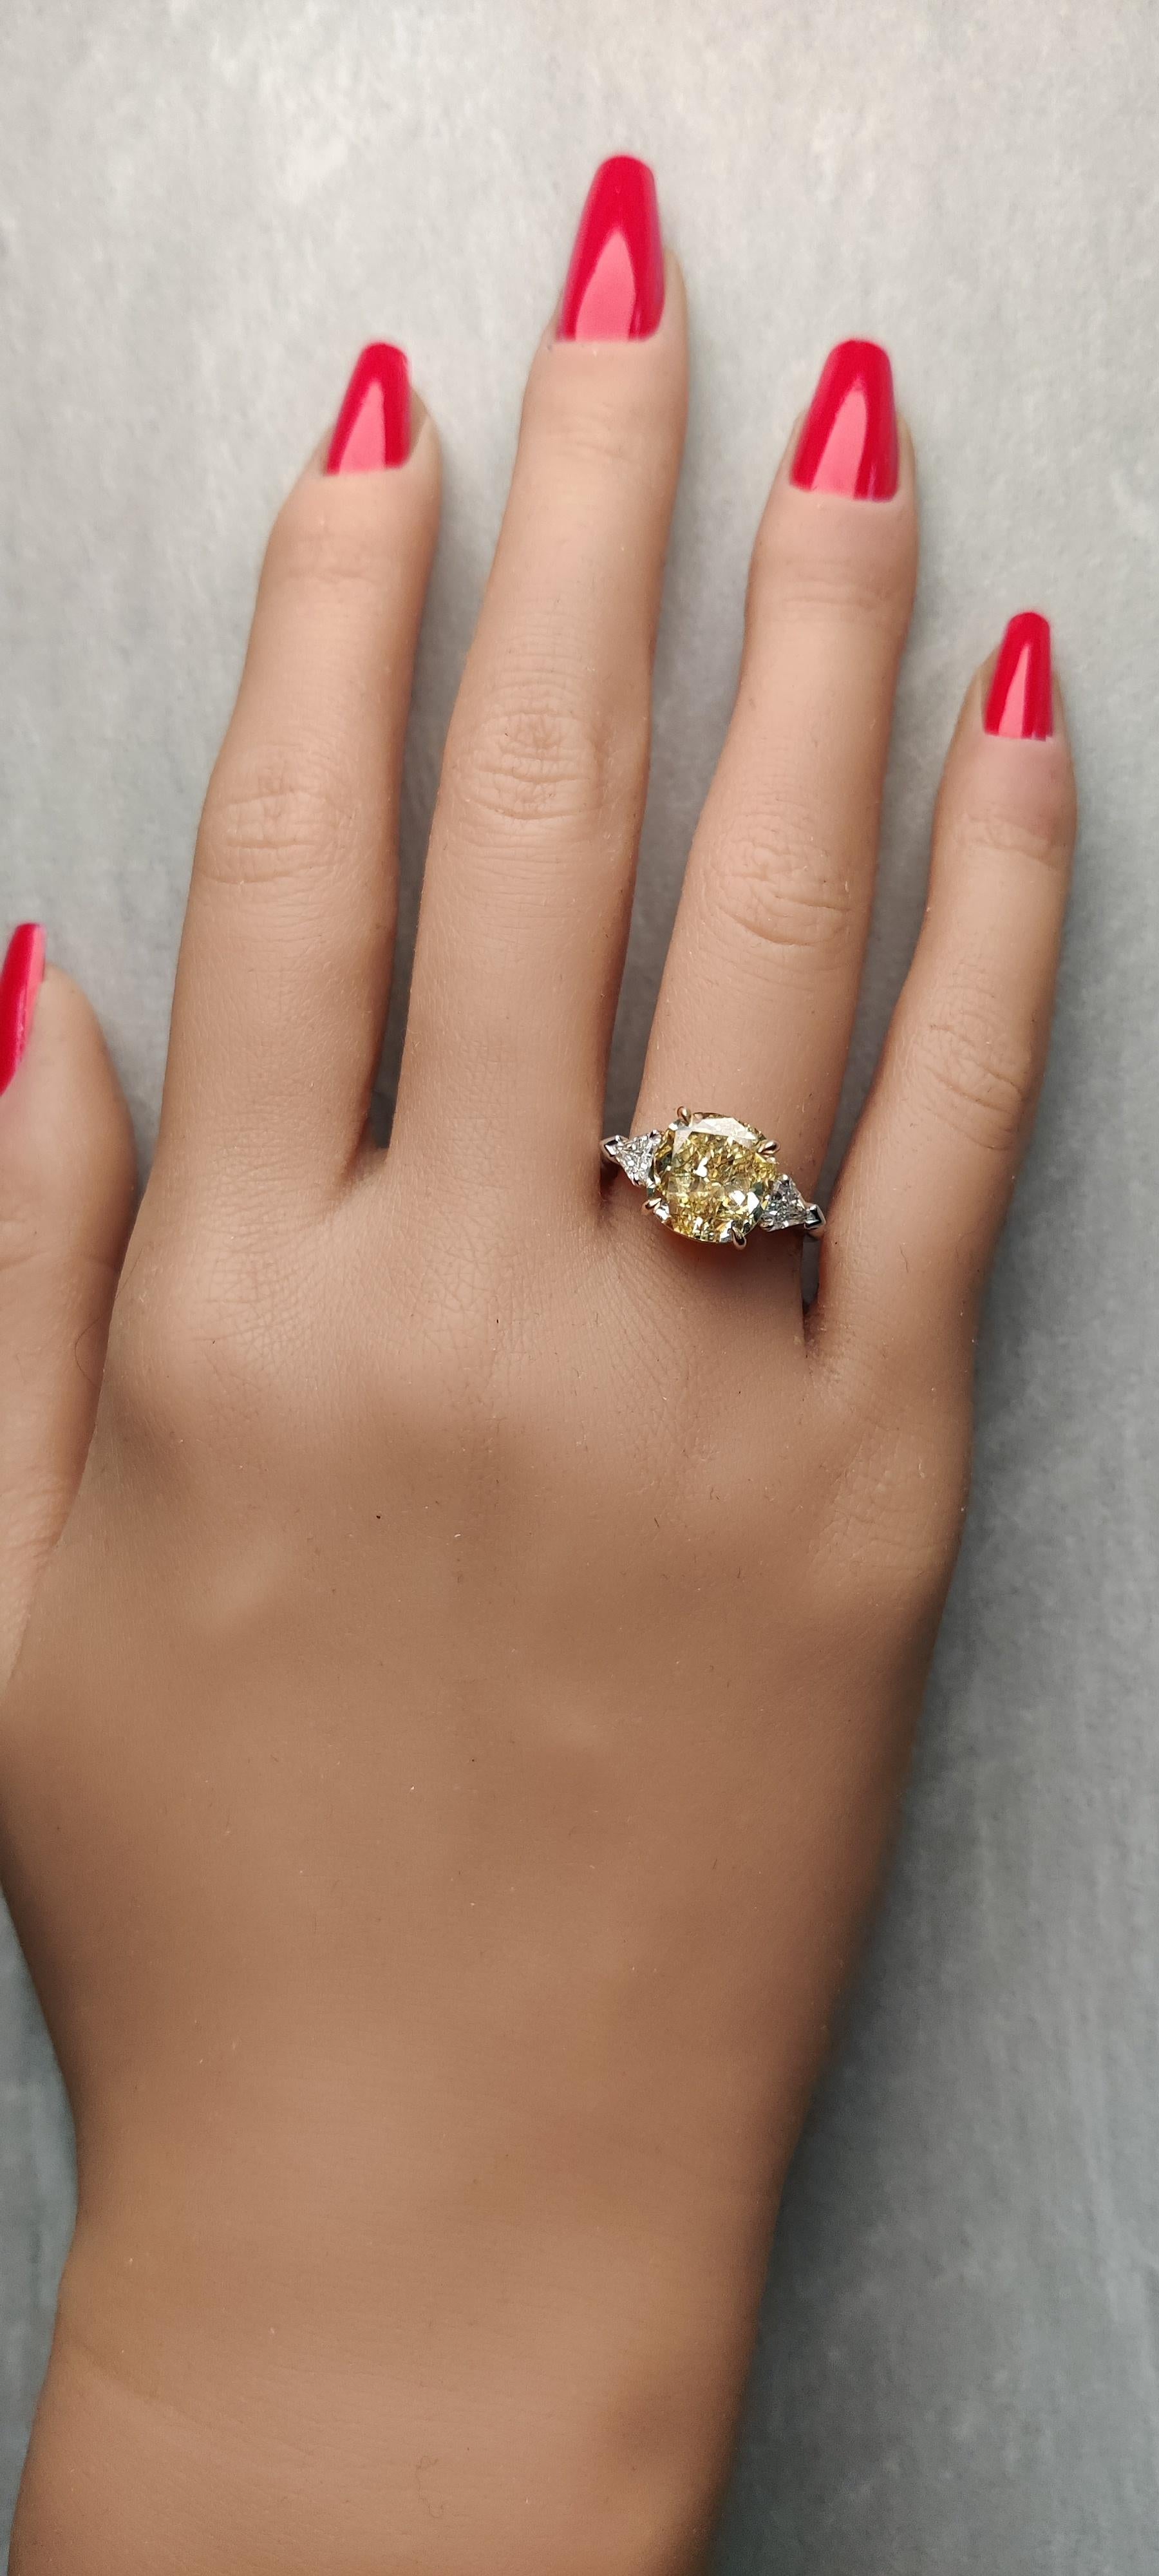 RareGemWorld's classic diamond ring. Mounted in a beautiful 18K Gold and Platinum setting with a natural cushion cut yellow diamond. The yellow diamond is surrounded by natural two kite cut white diamonds. This ring is guaranteed to impress and